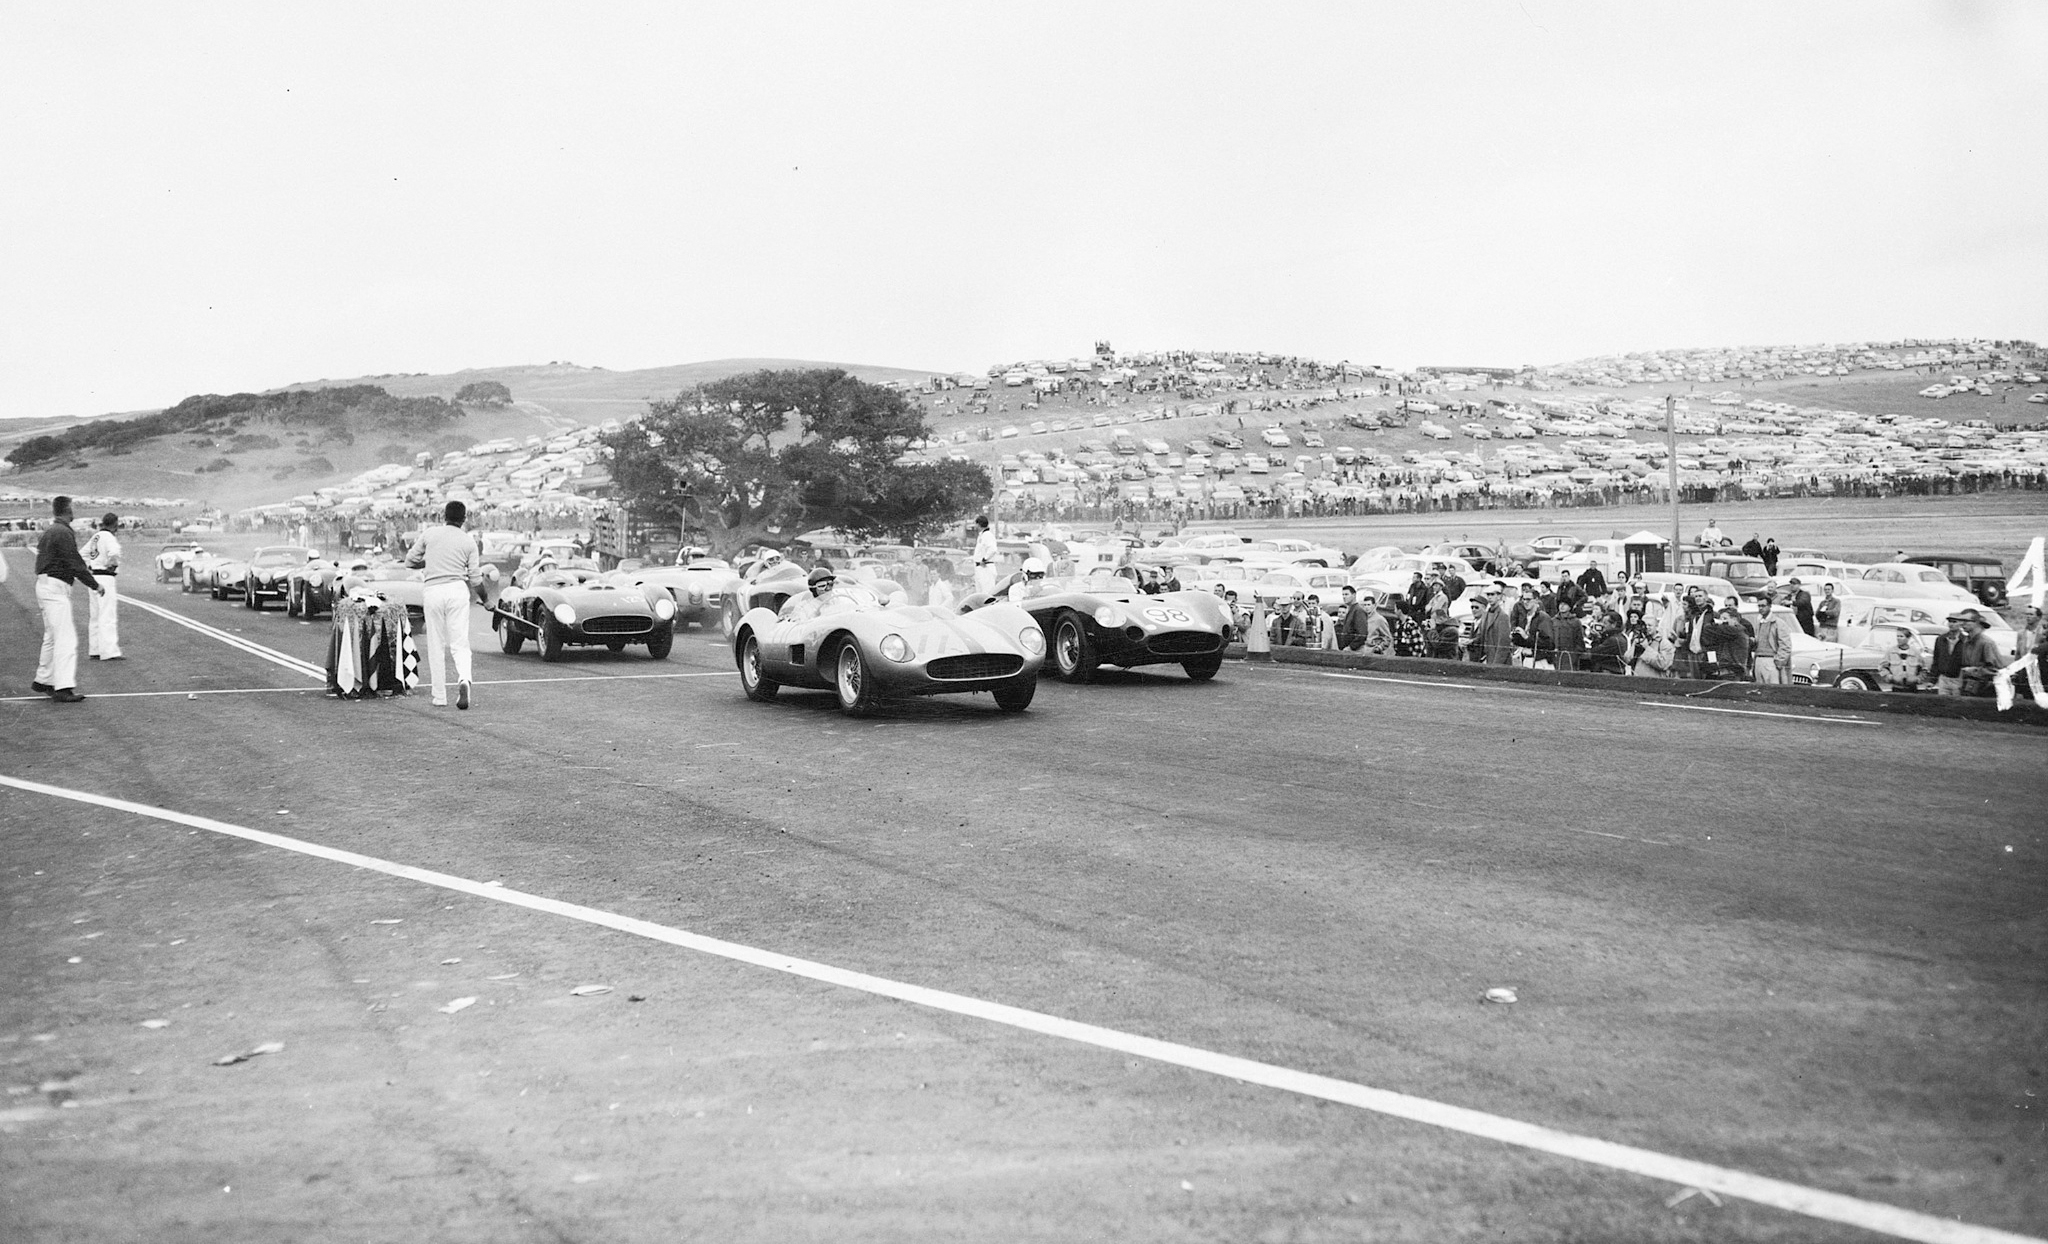 Cars line up on the grid for Laguna Seca's first race